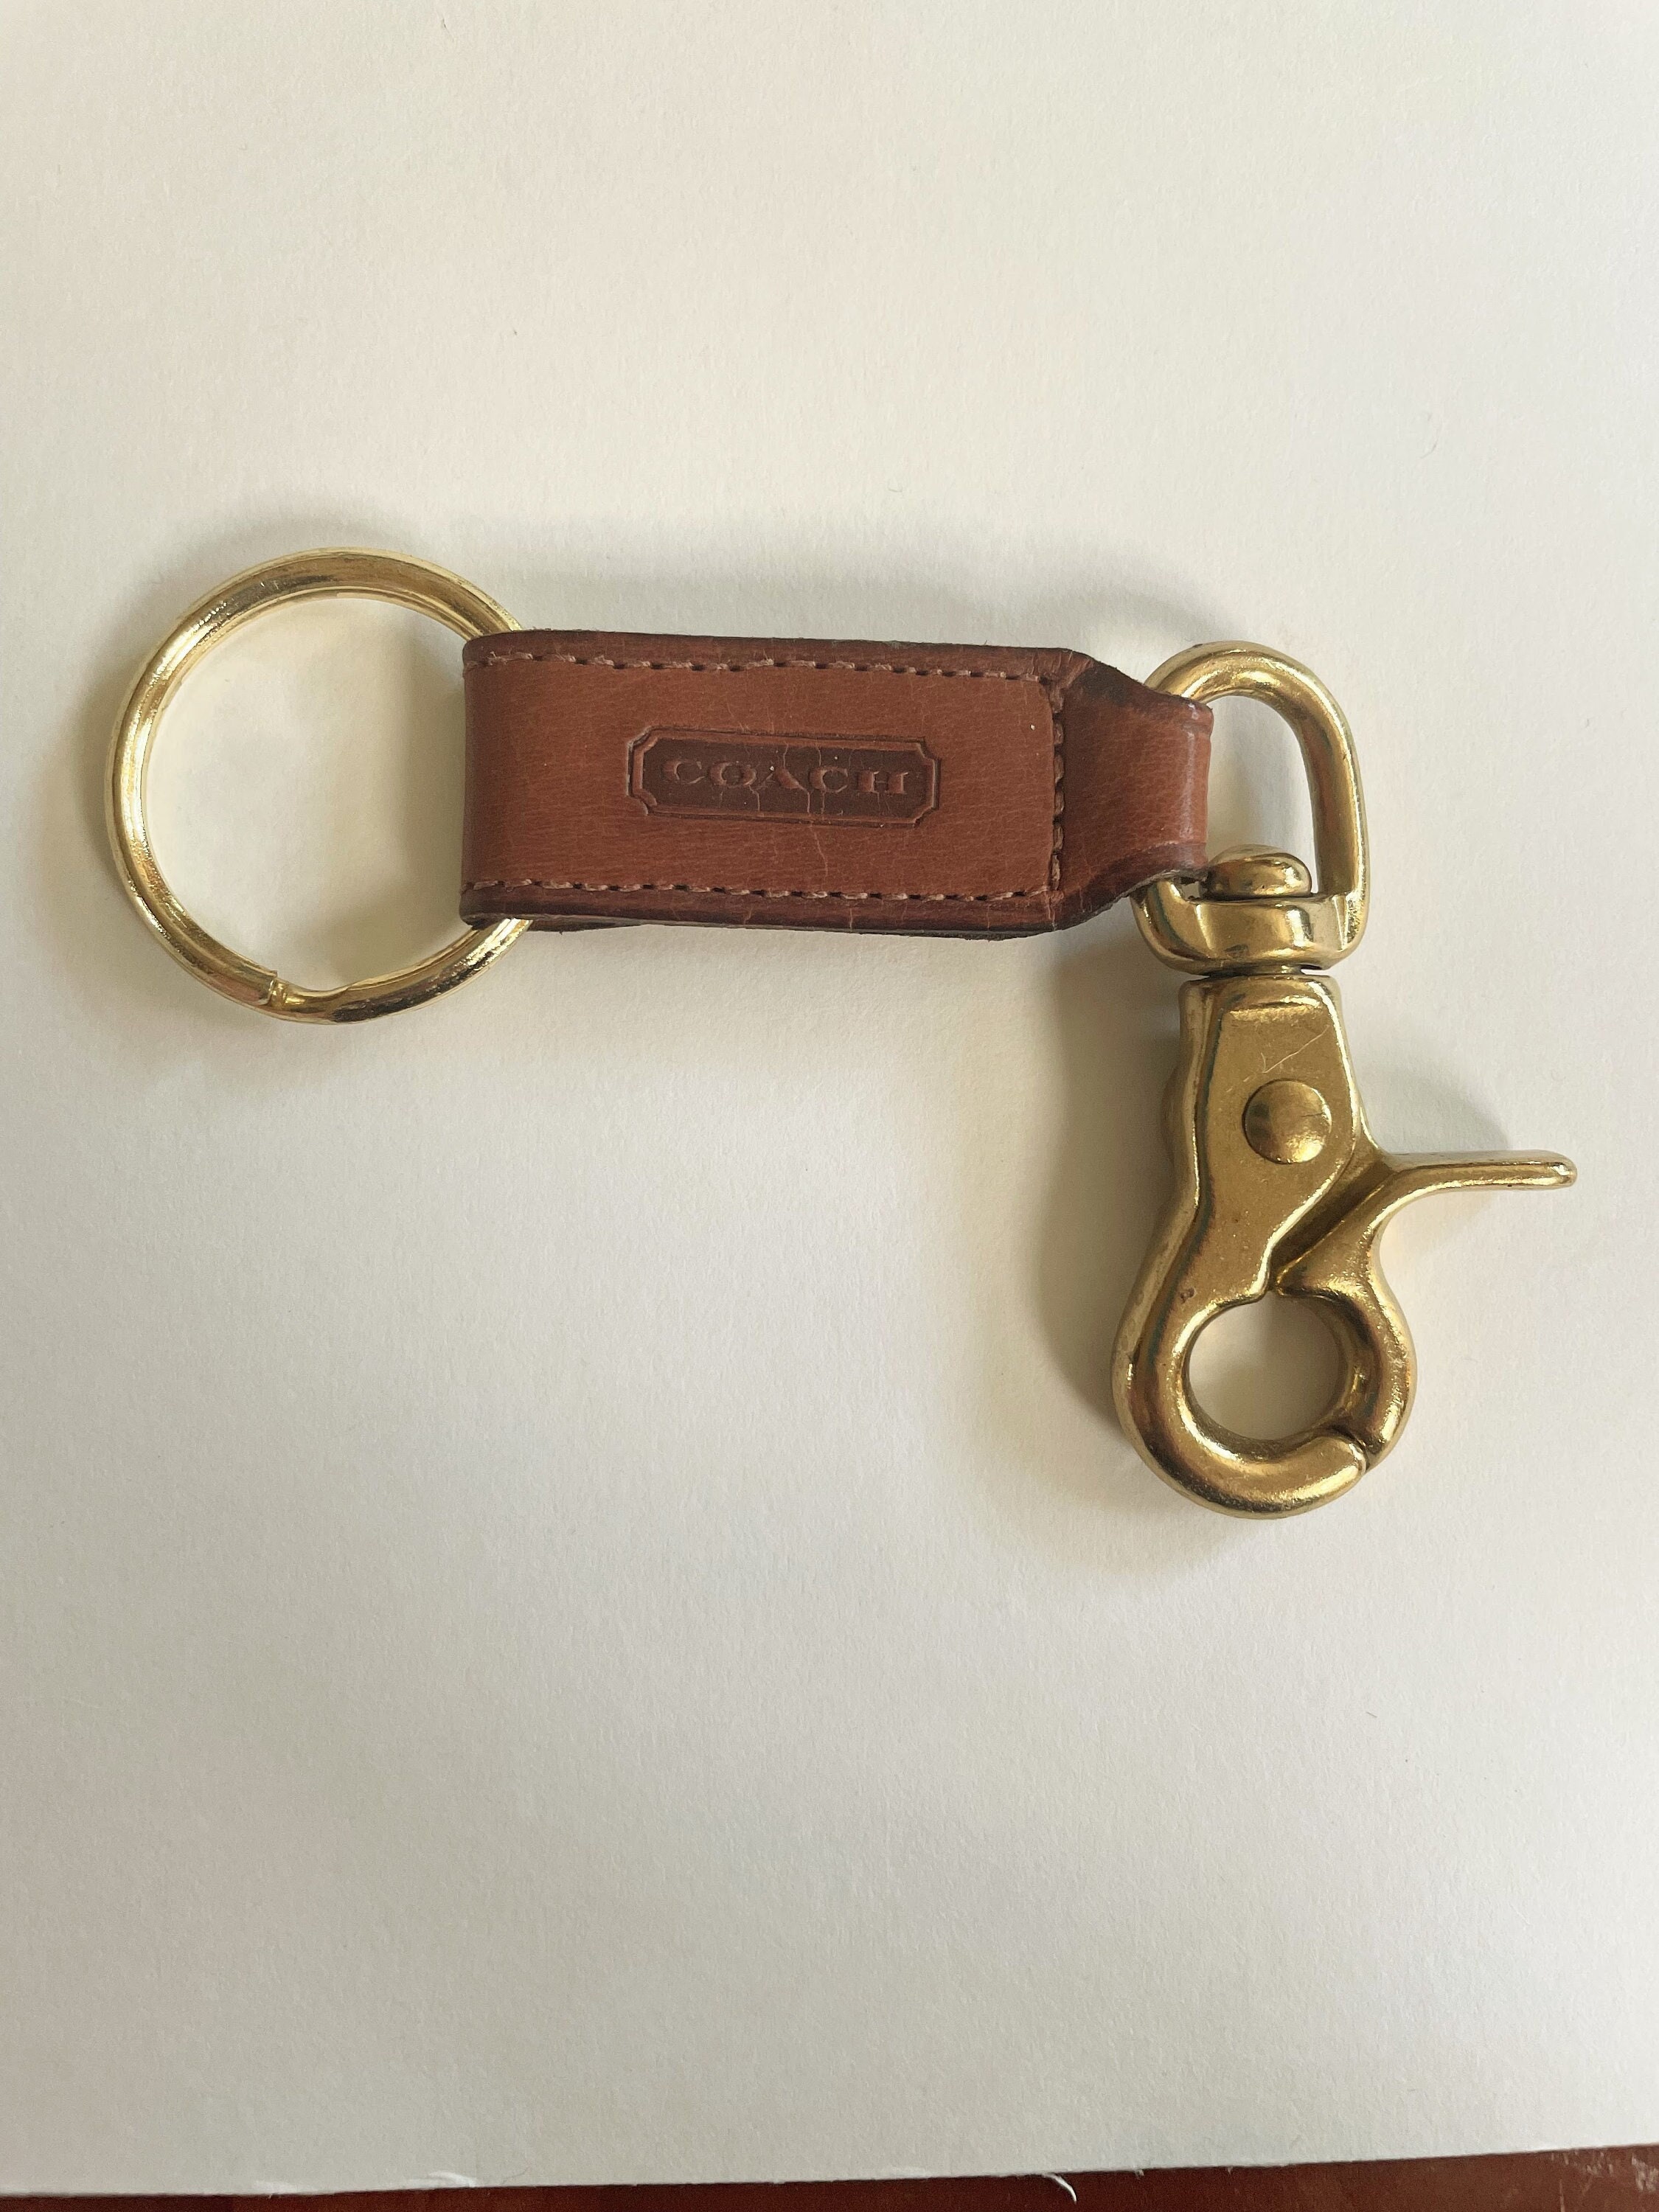 New Vintage 1990s Coach Keychain Leather FOB Brass Trigger 